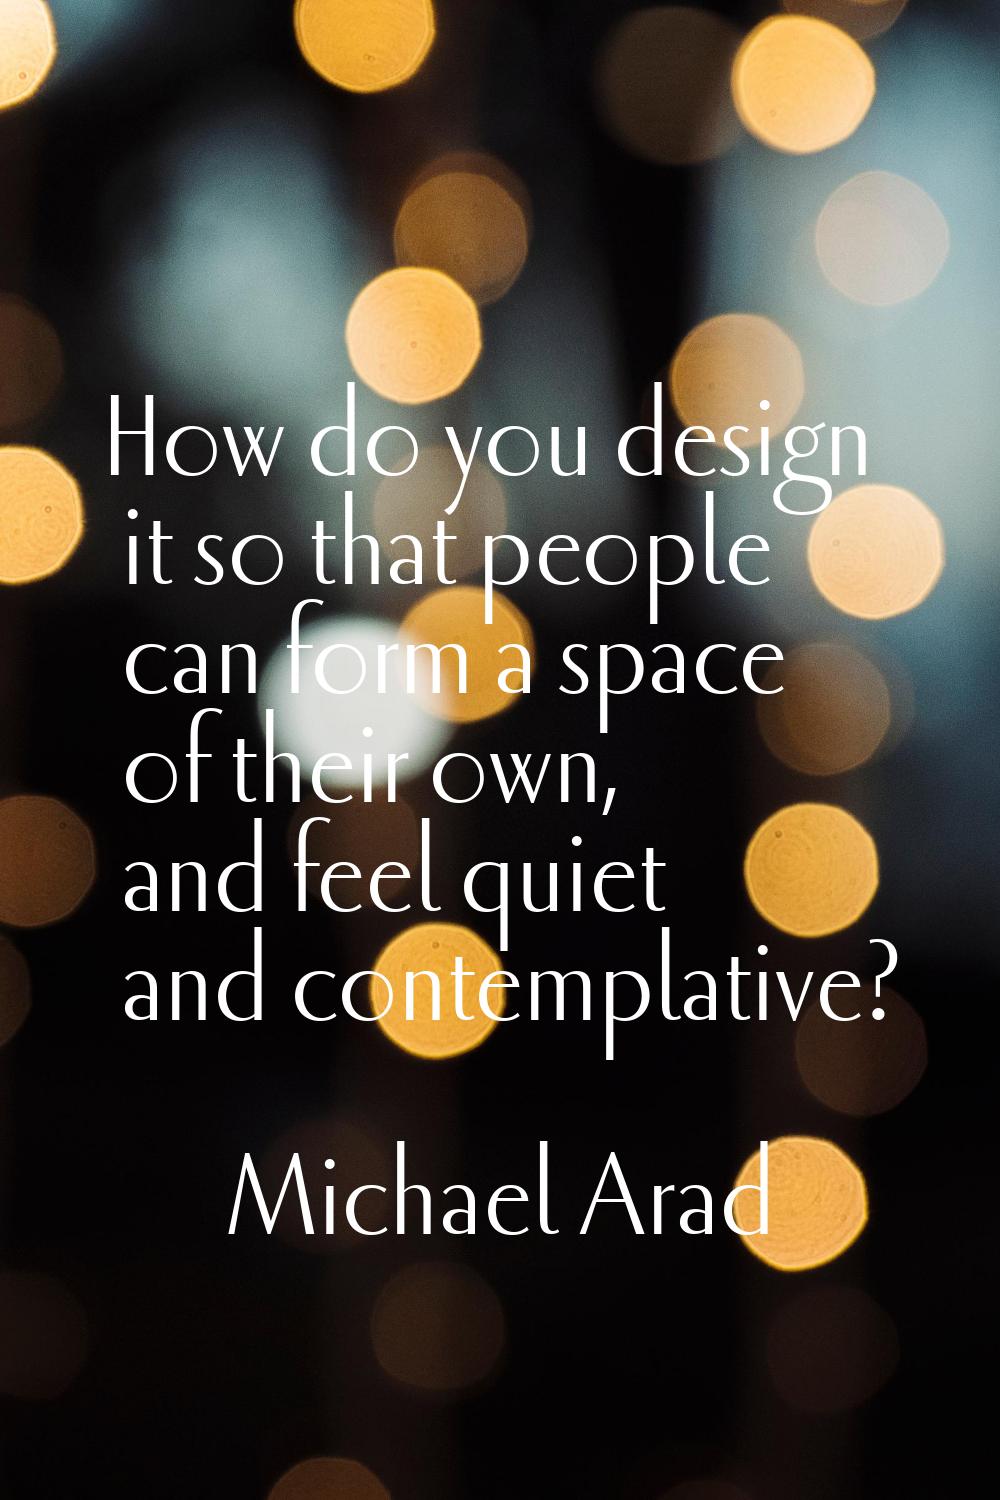 How do you design it so that people can form a space of their own, and feel quiet and contemplative